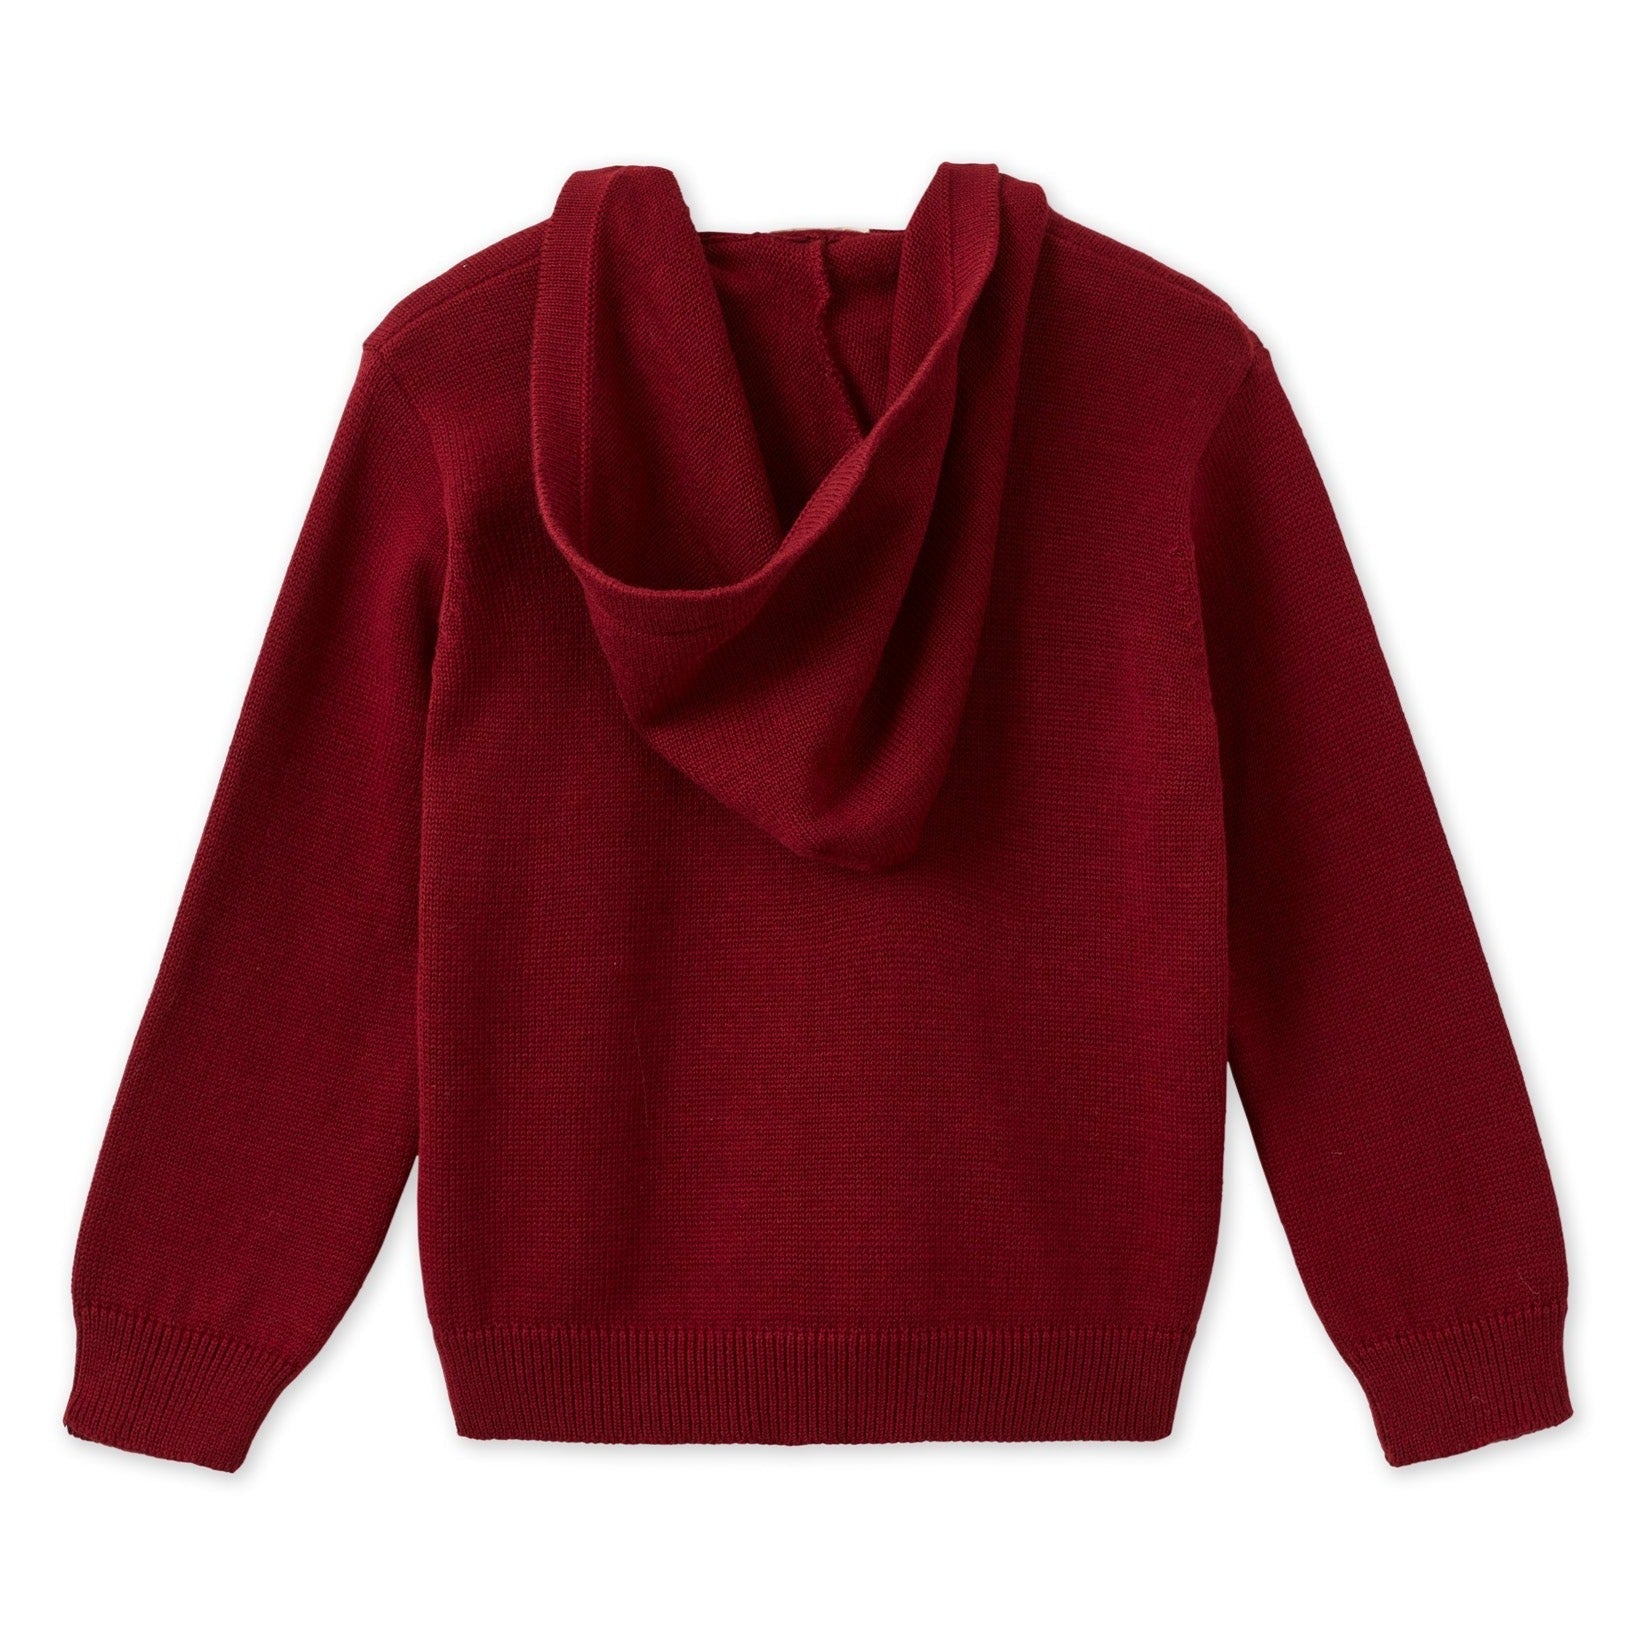 Organic Cotton Knit Cardigan by Vild House of Little (5 Colours Available)